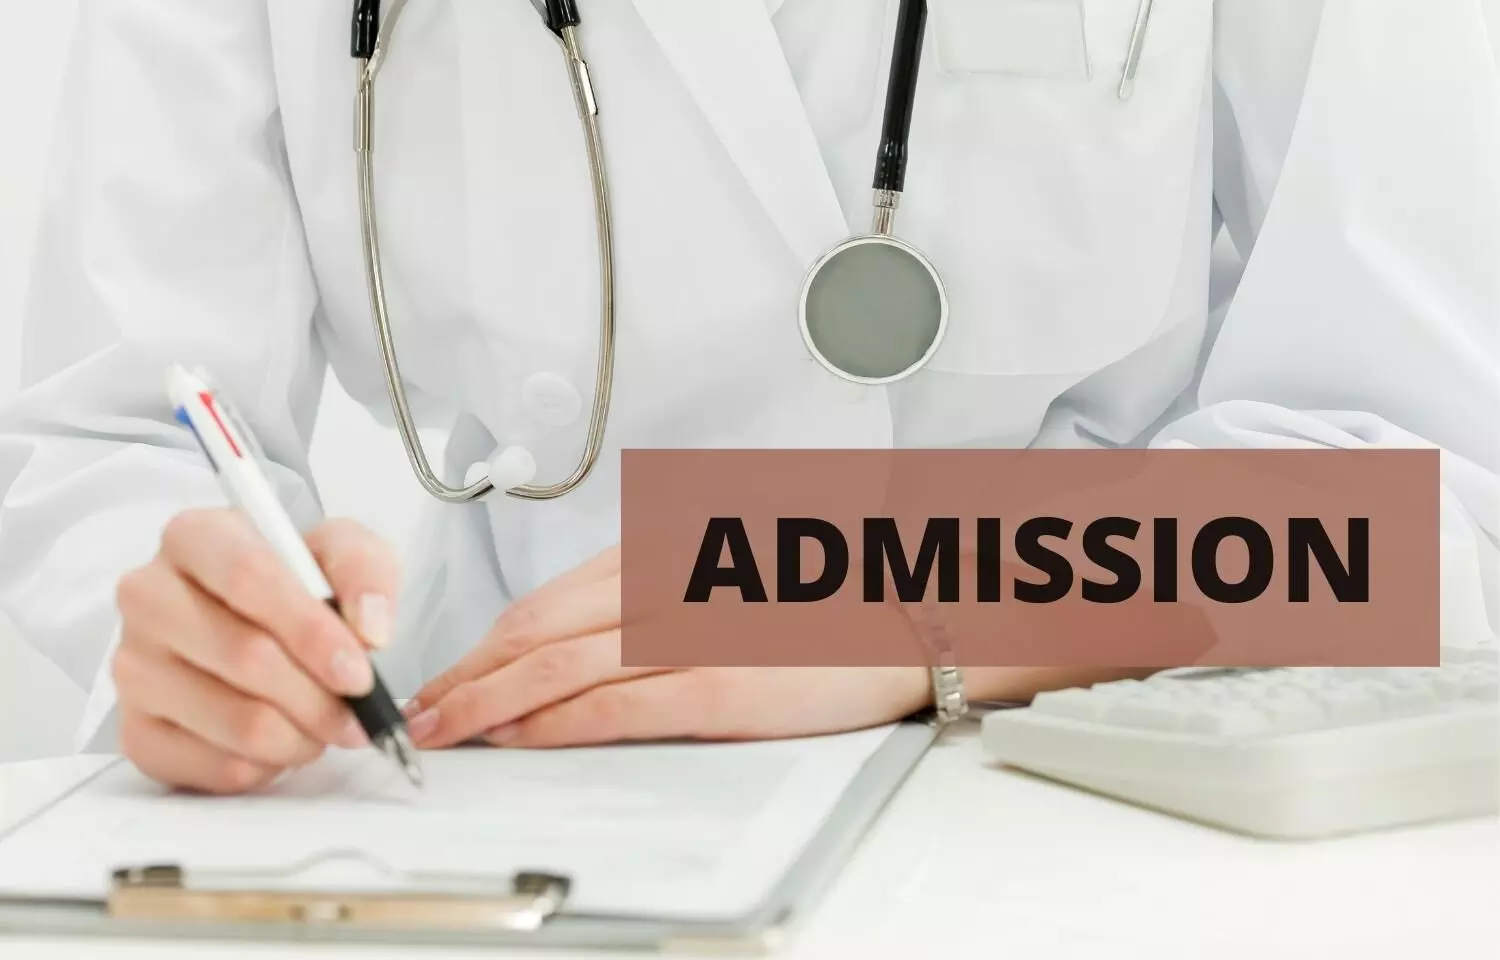 CENTAC issues corrigendum for NEET PG, NEET MDS admissions in Puducherry, Check out details